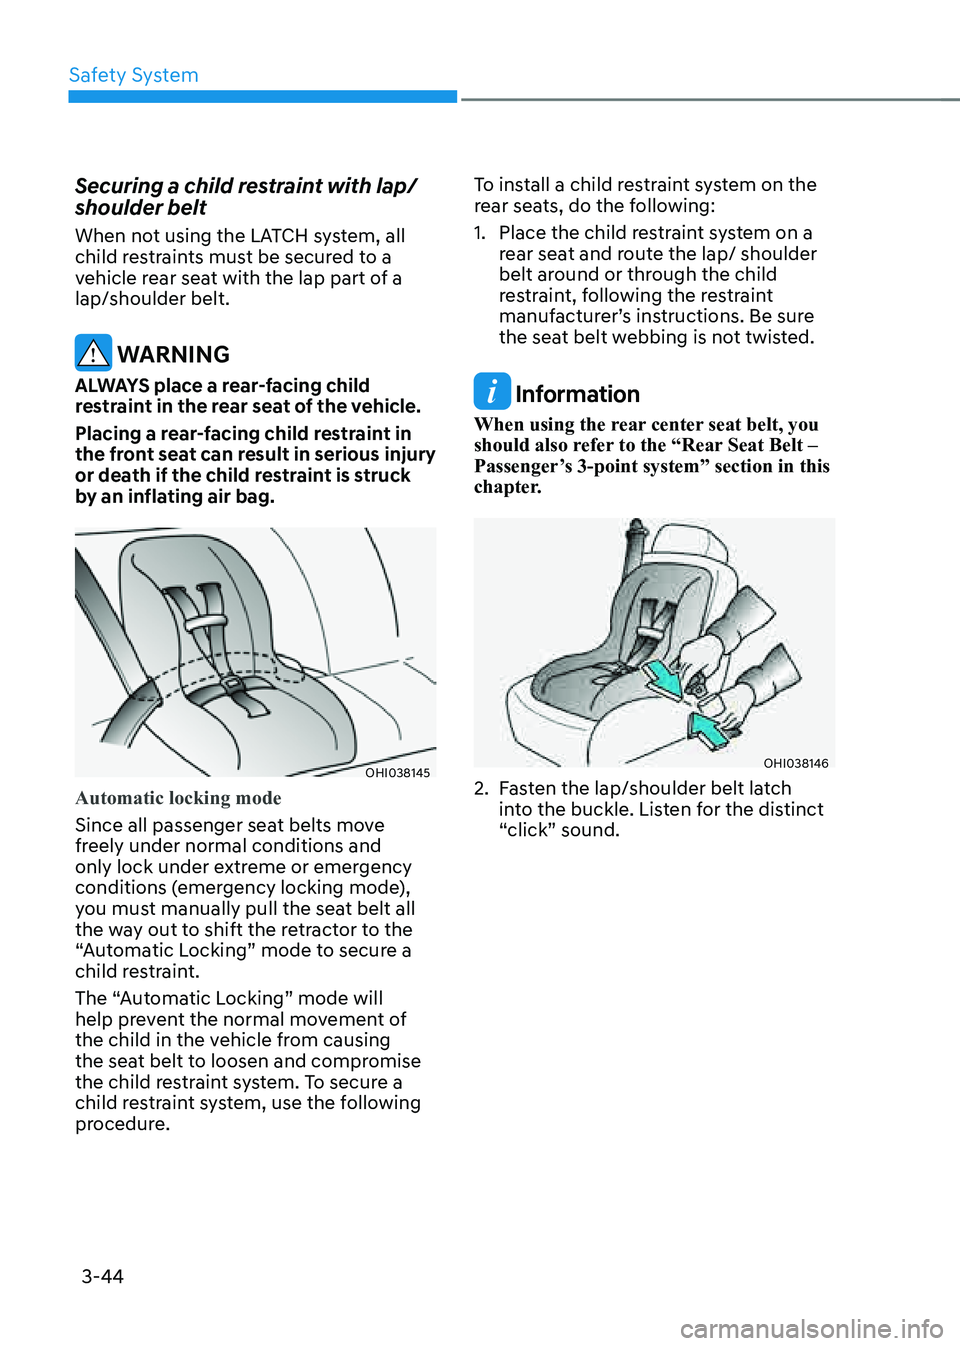 GENESIS G80 2021  Owners Manual Safety System
3-44
Securing a child restraint with lap/
shoulder belt
When not using the LATCH system, all 
child restraints must be secured to a 
vehicle rear seat with the lap part of a 
lap/shoulde